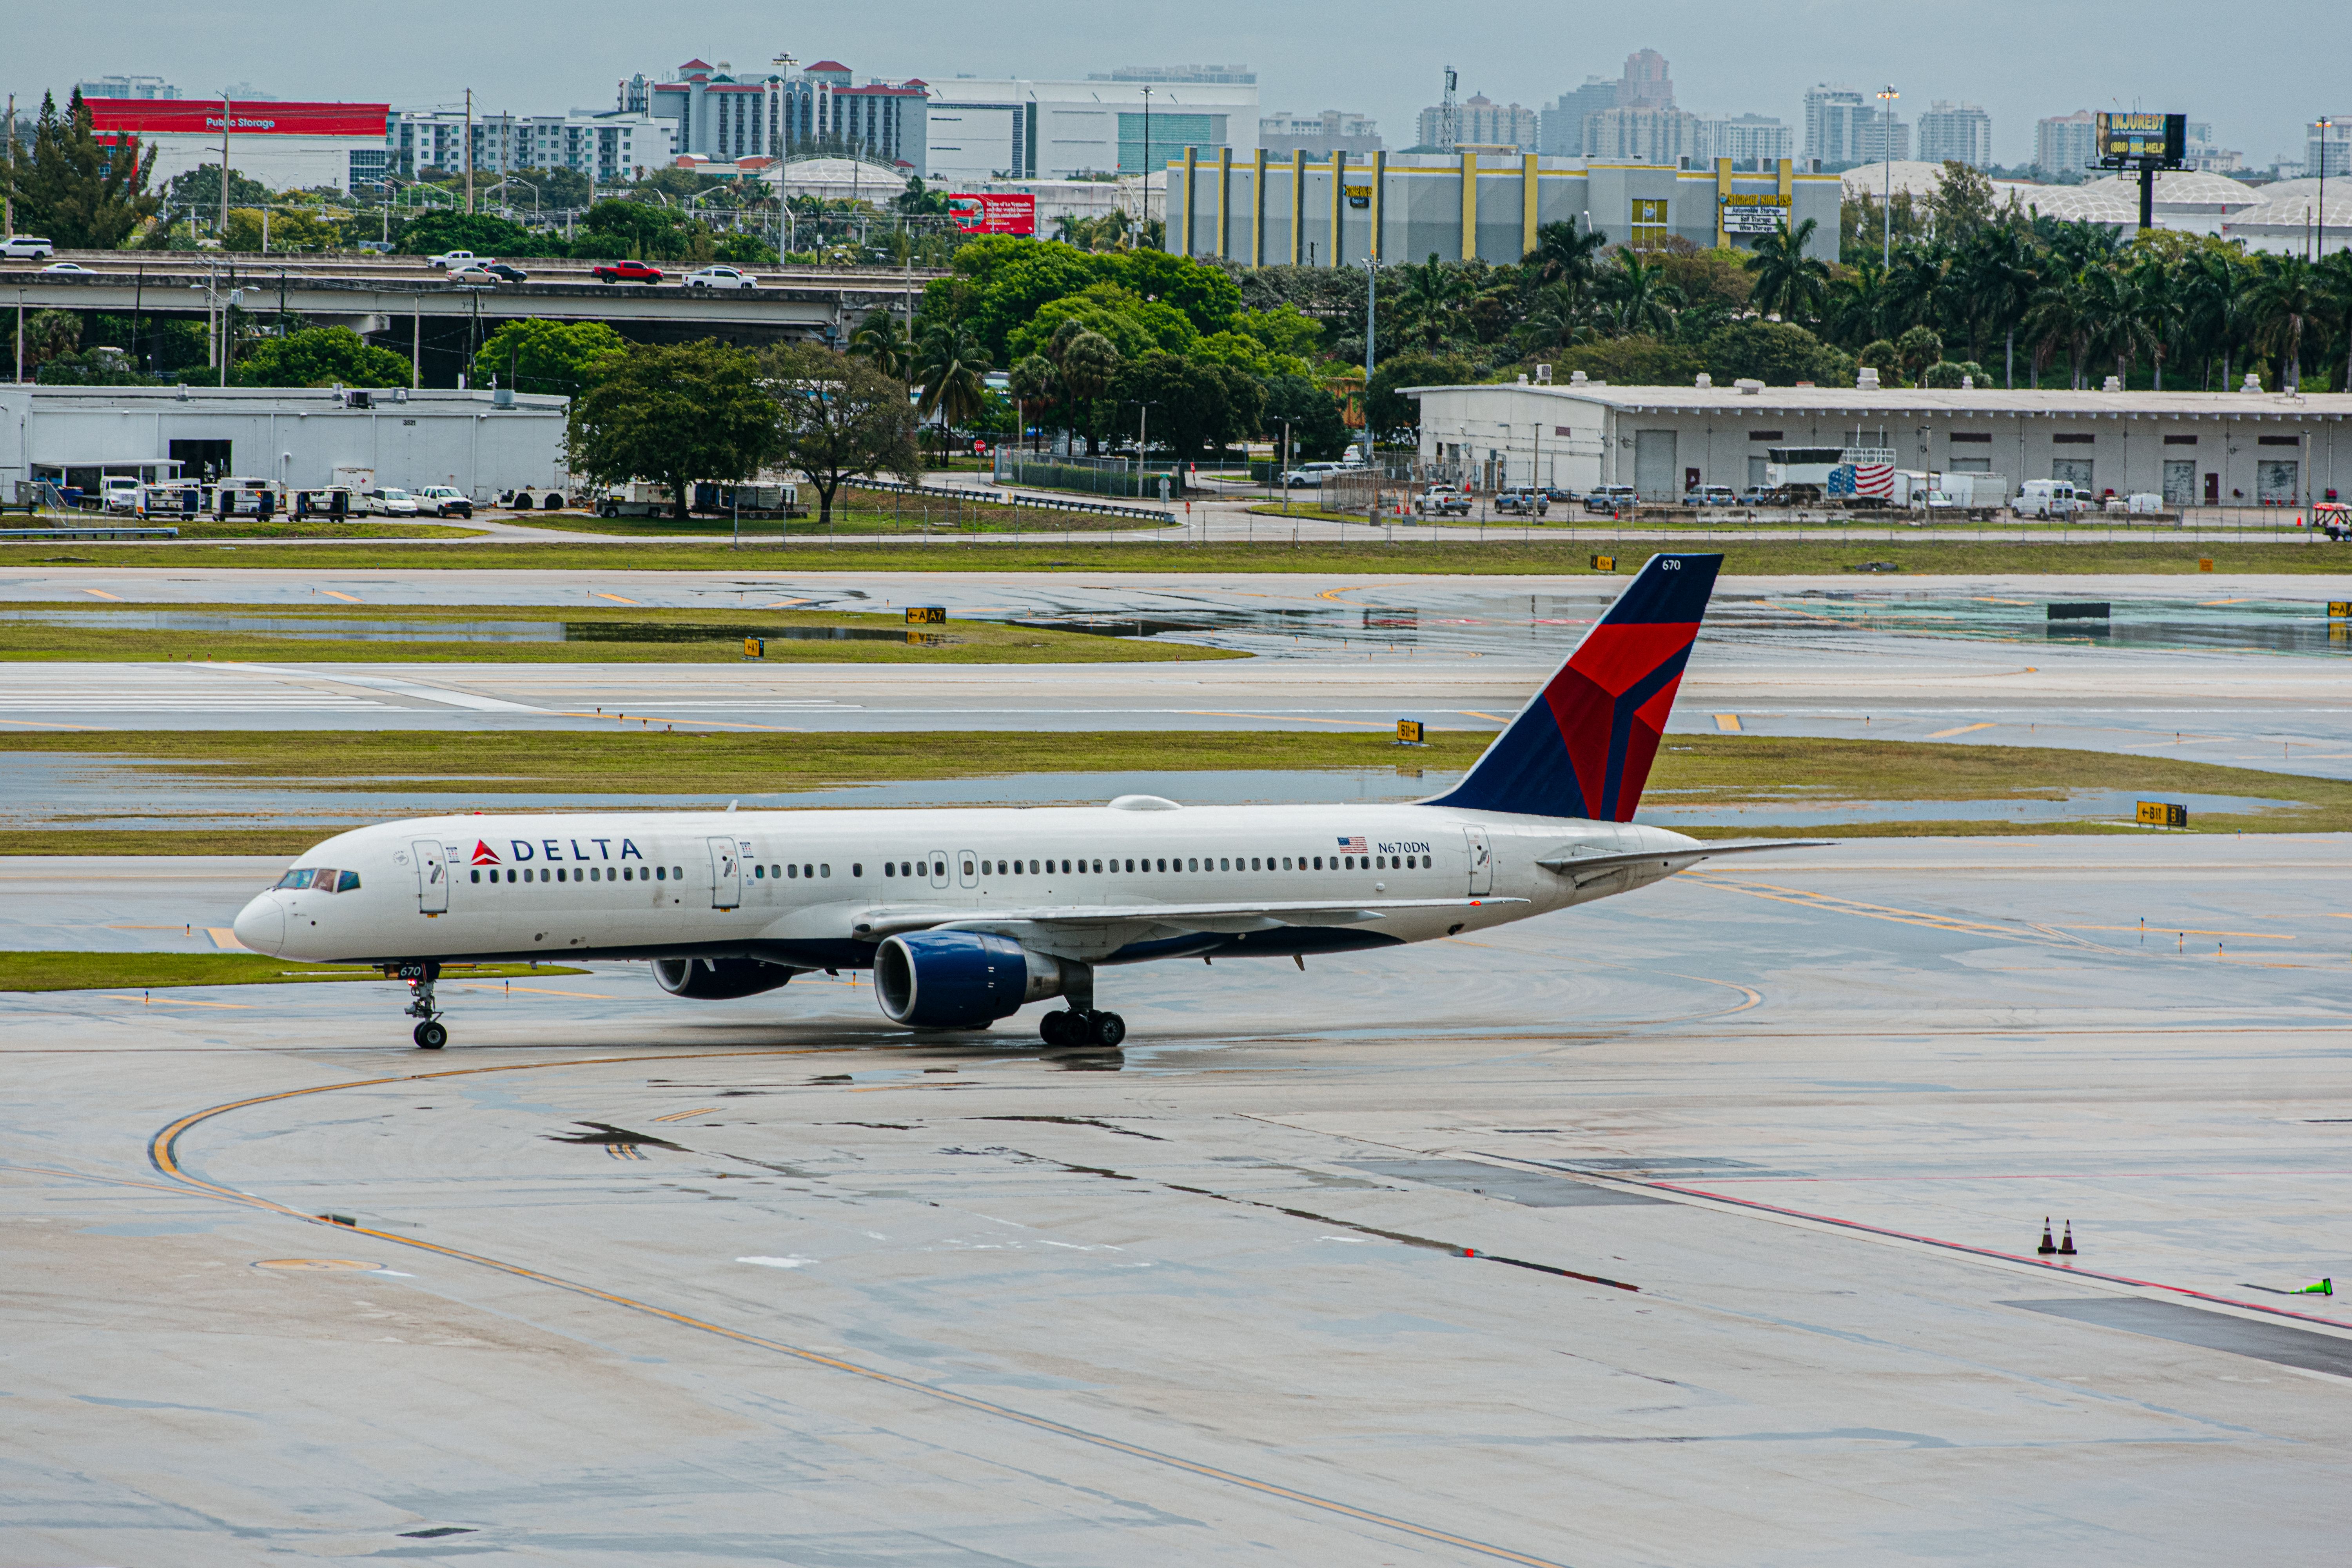 Delta Air Lines Boeing 757 taxiing FLL